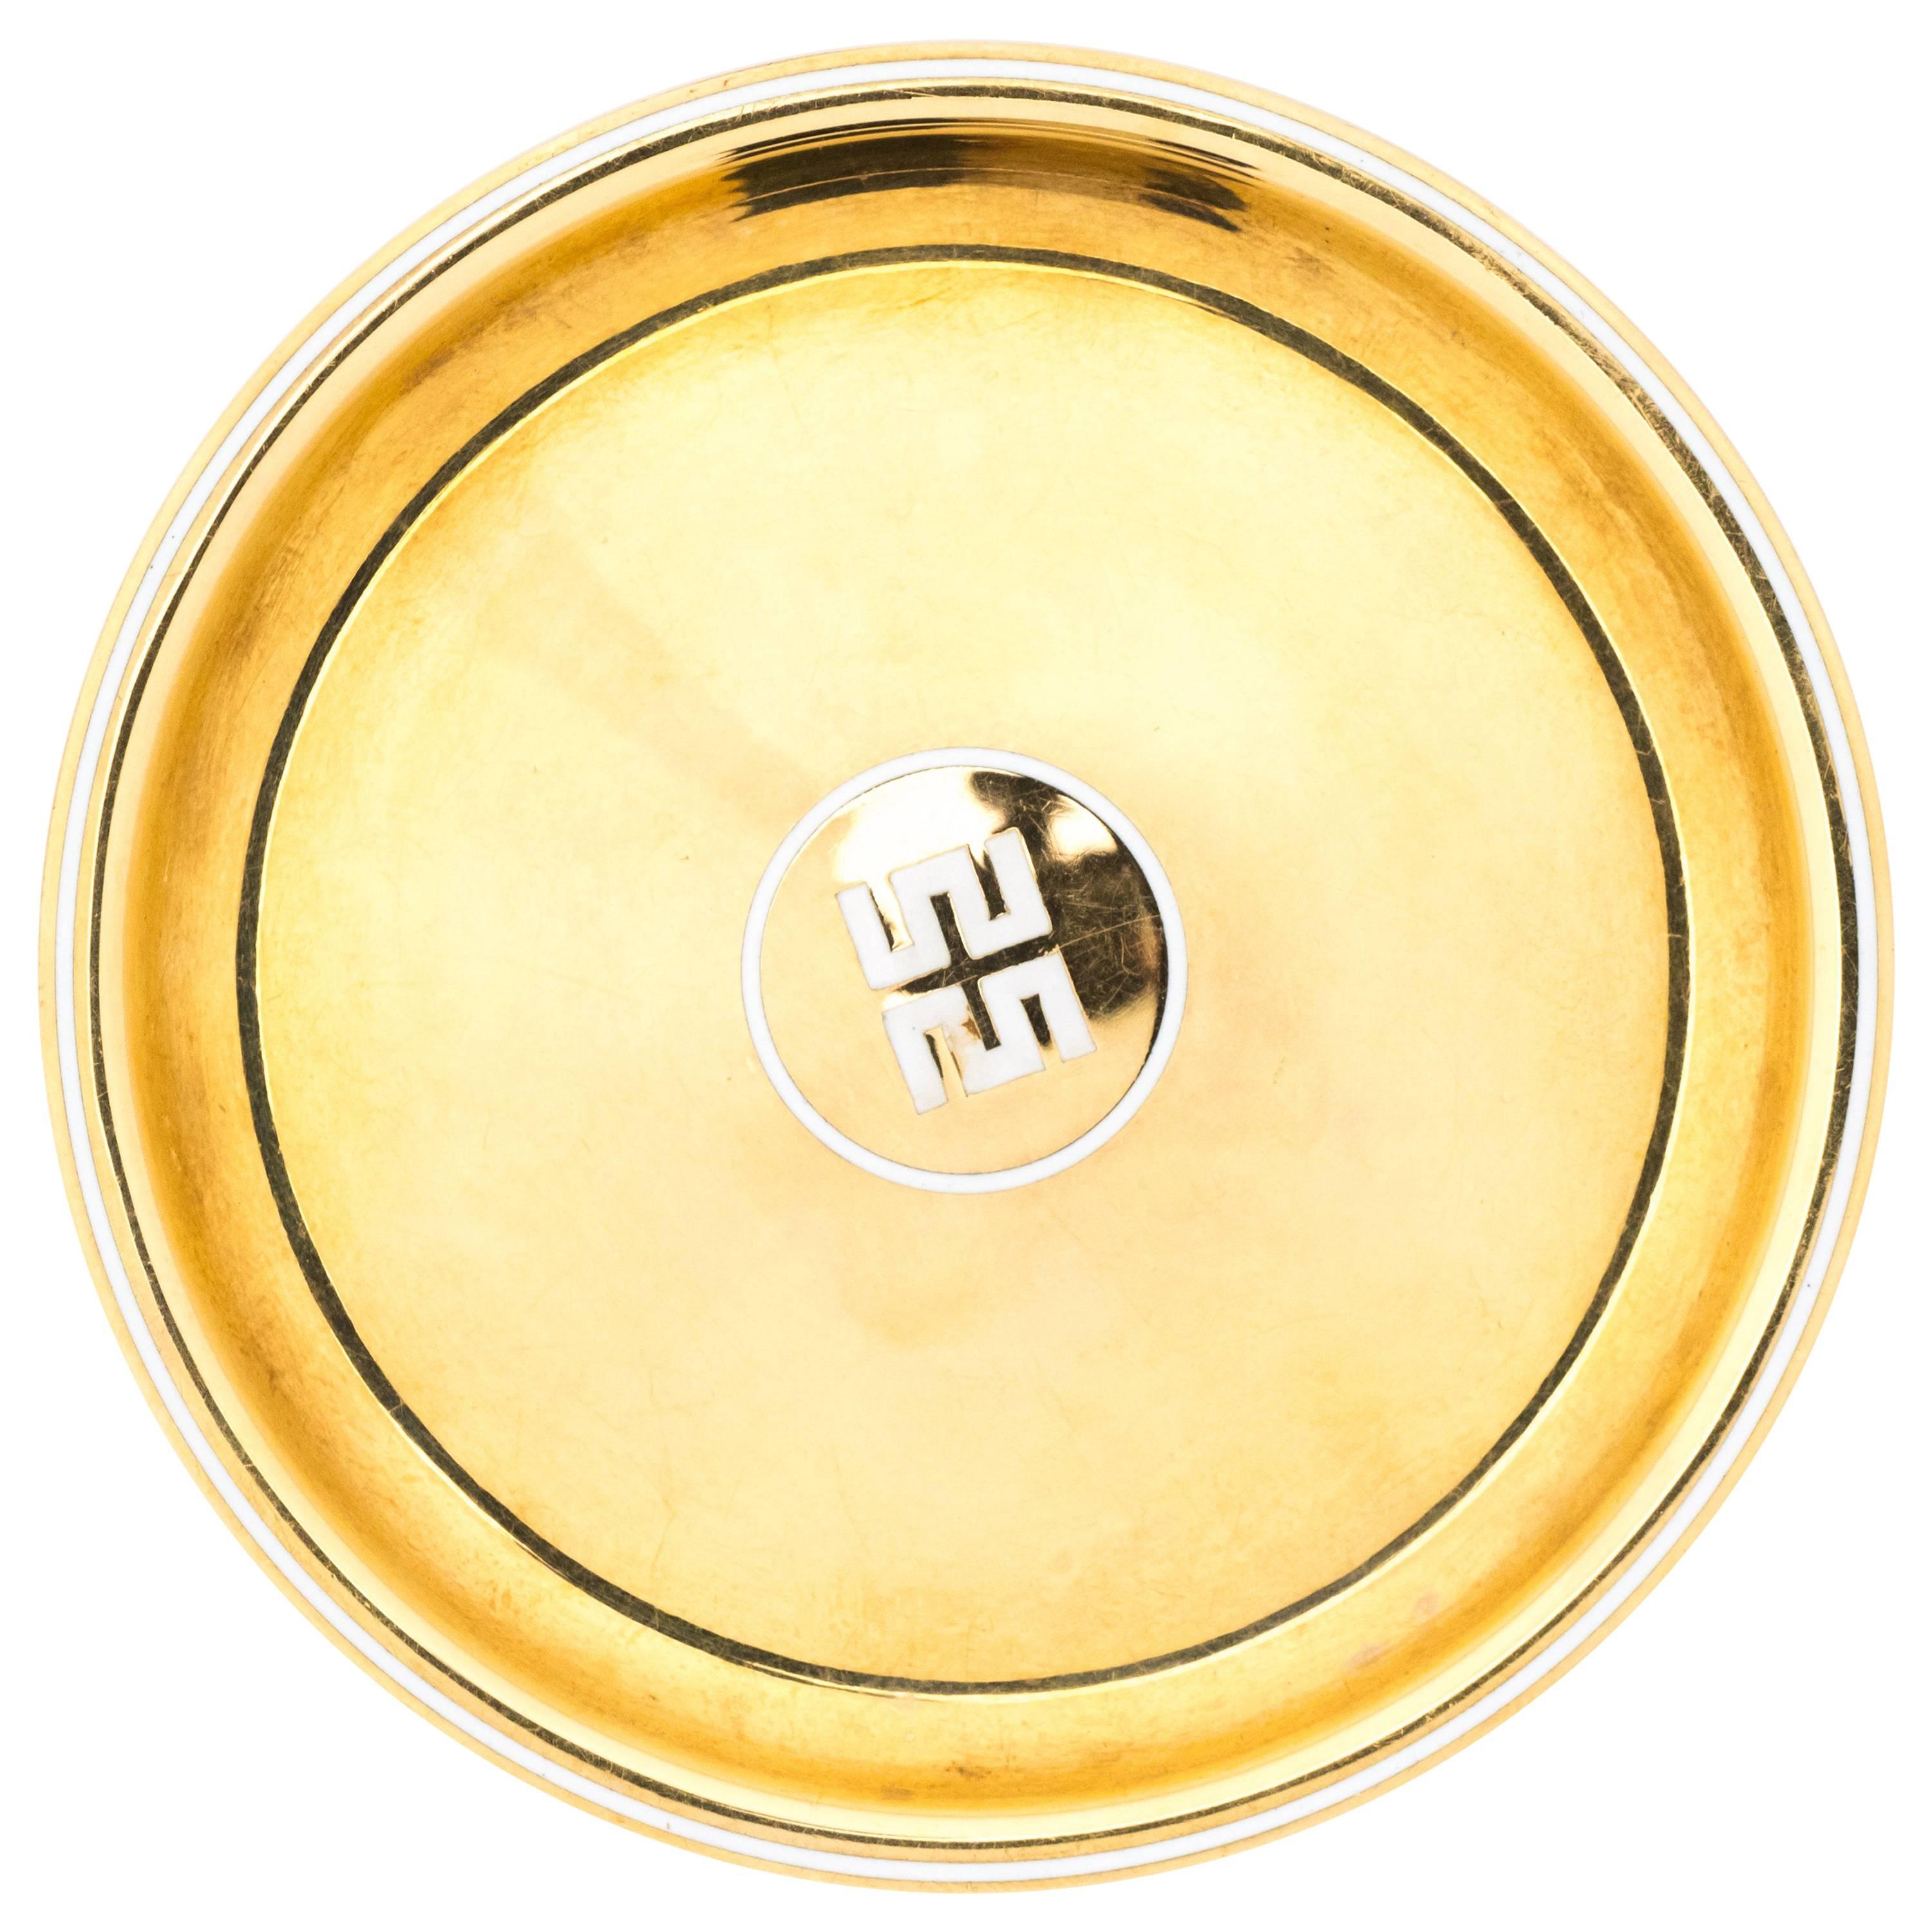 1960s Cartier Solid 18 Karat Yellow Gold Happiness Plate